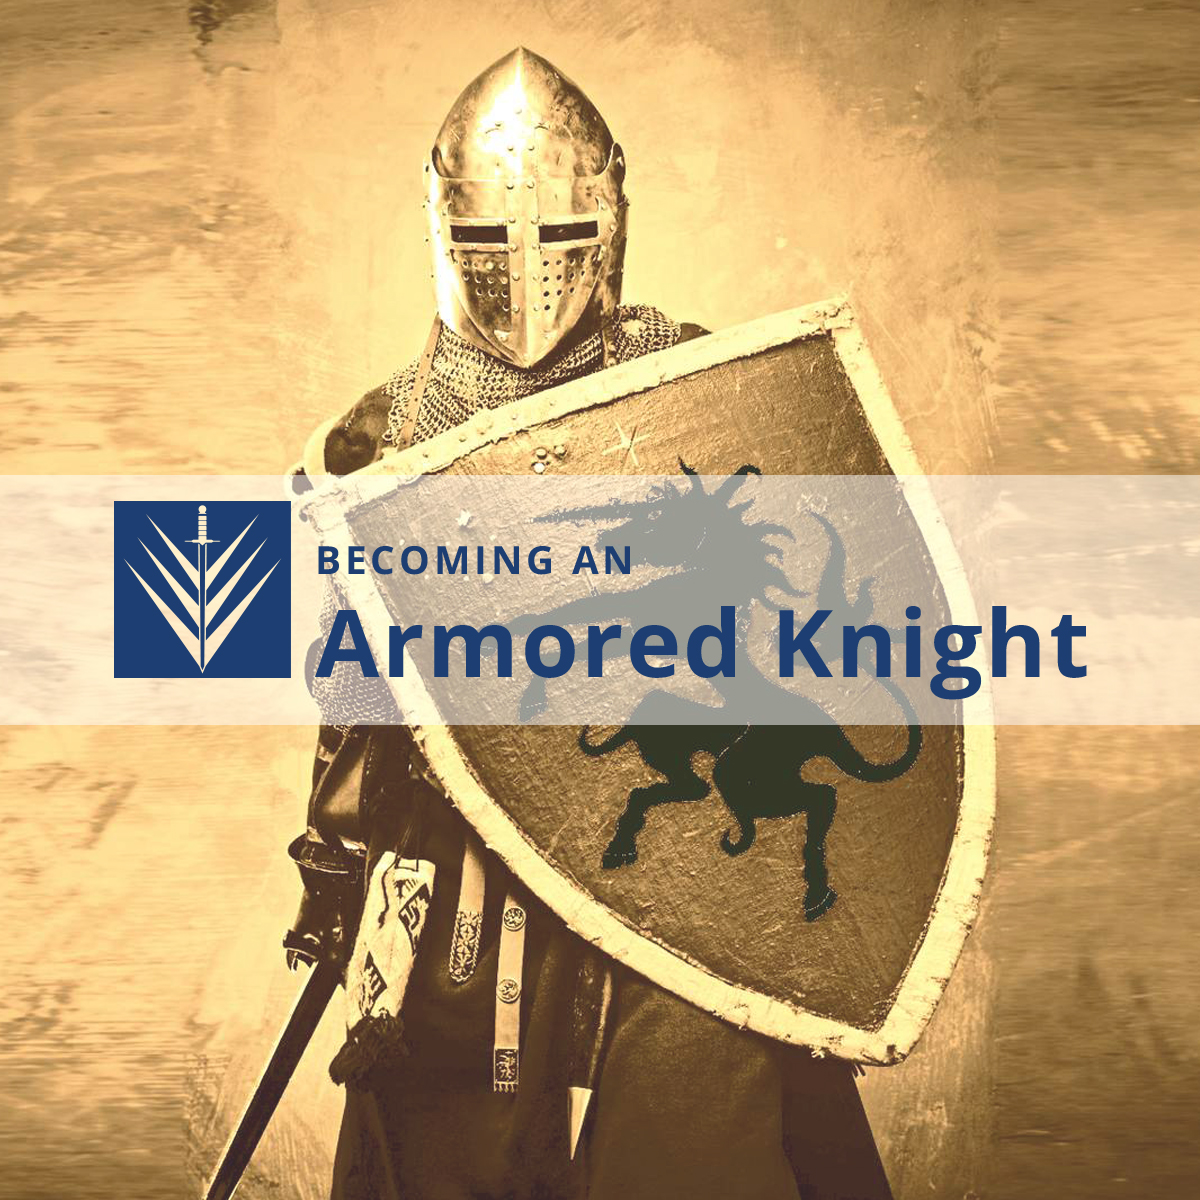 Becoming an Armored Knight